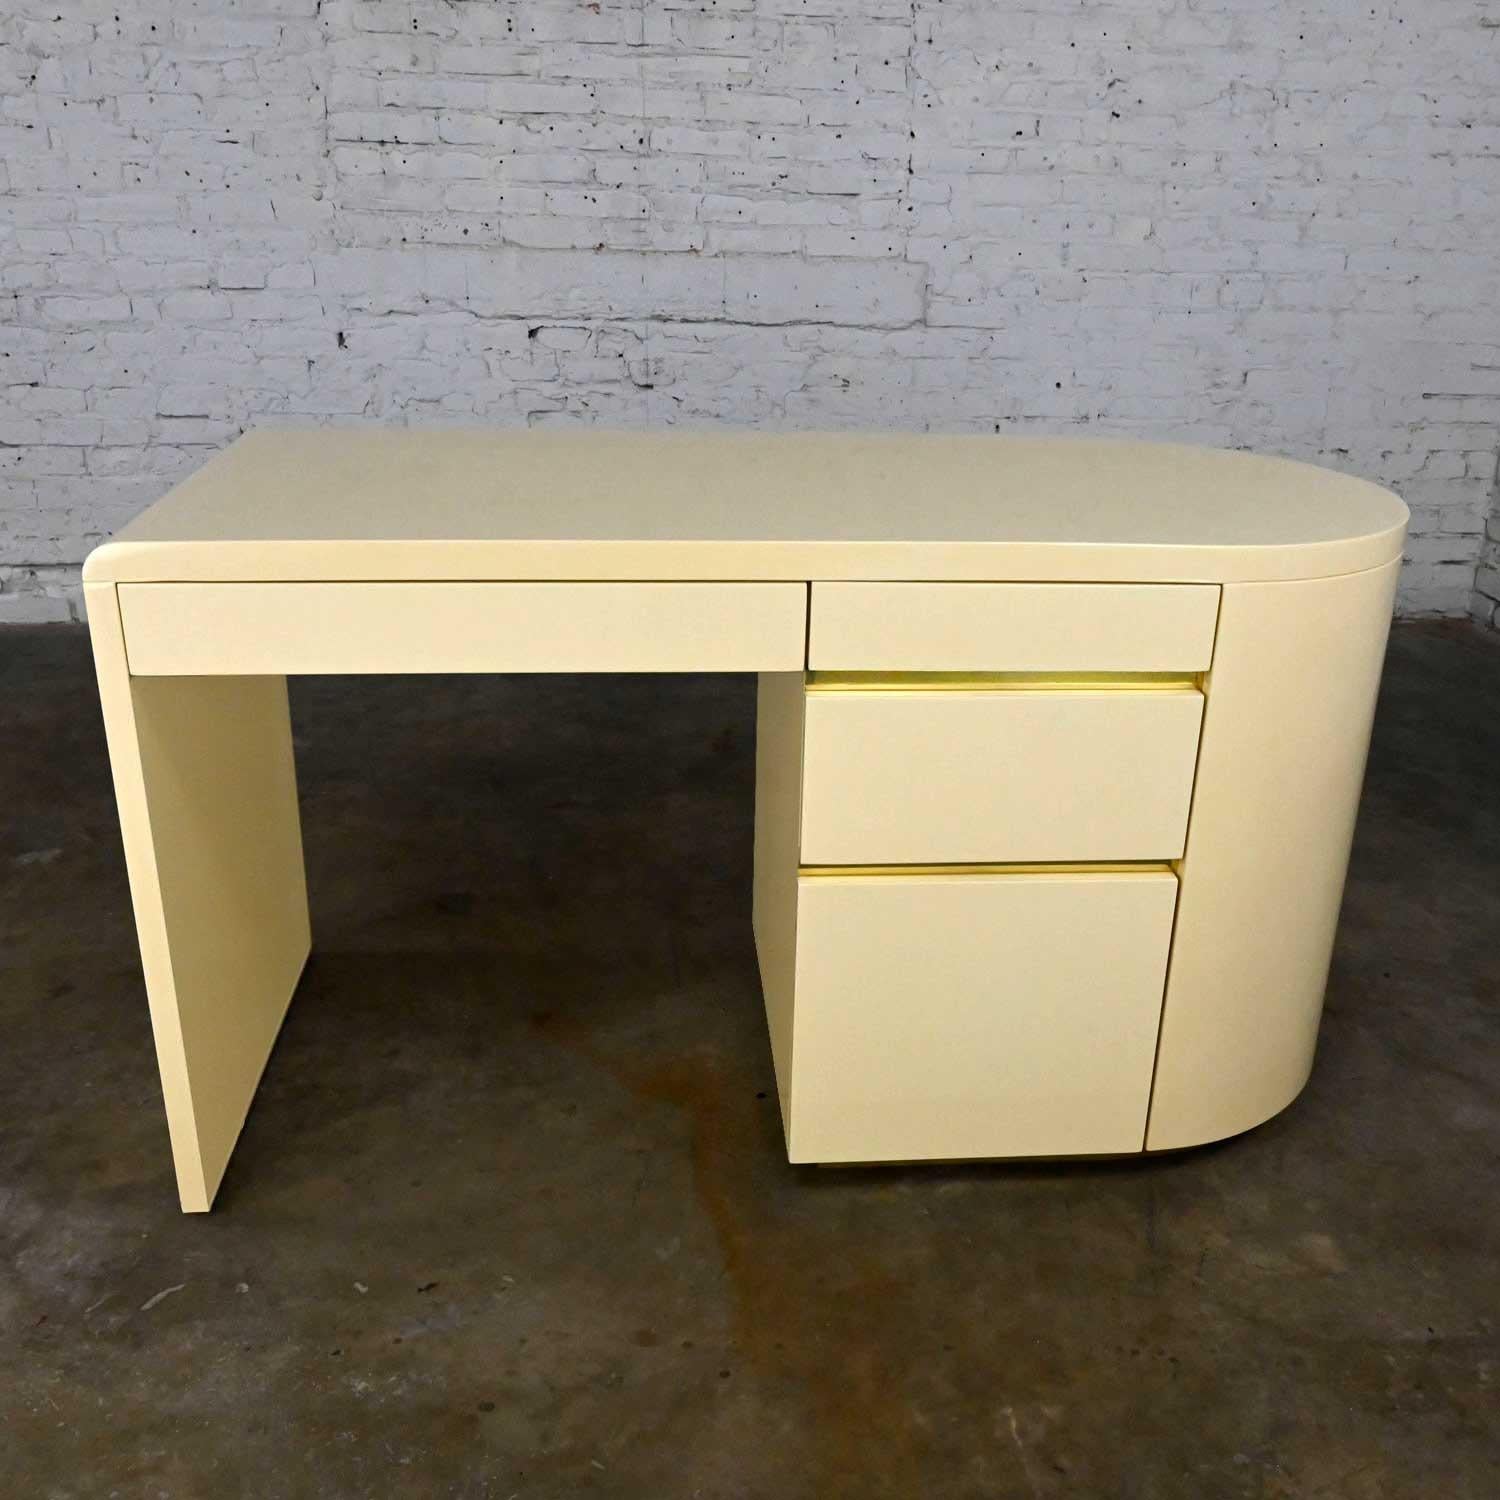 Stunning modern off-white lacquered desk with brass plated details between the drawers and a brass plated toe kick in the style of Milo Baughman, Karl Springer, Lane. Beautiful condition, keeping in mind that this is vintage and not new so will have